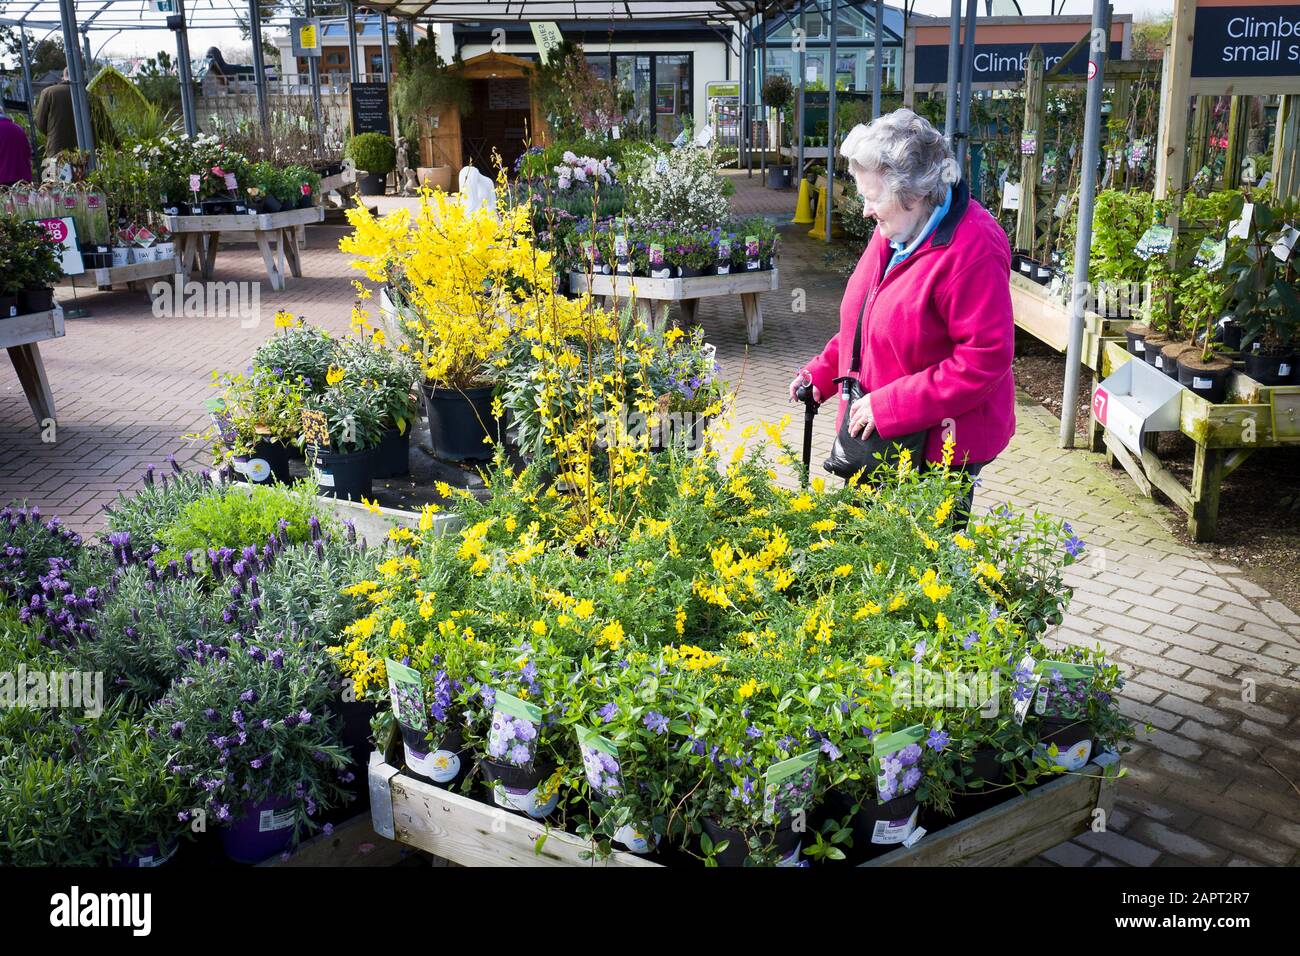 A Garden Centre Customer Reviewing Seasonal Young Shrubs On Display In The Outdoor Plant Sales Area Stock Photo - Alamy